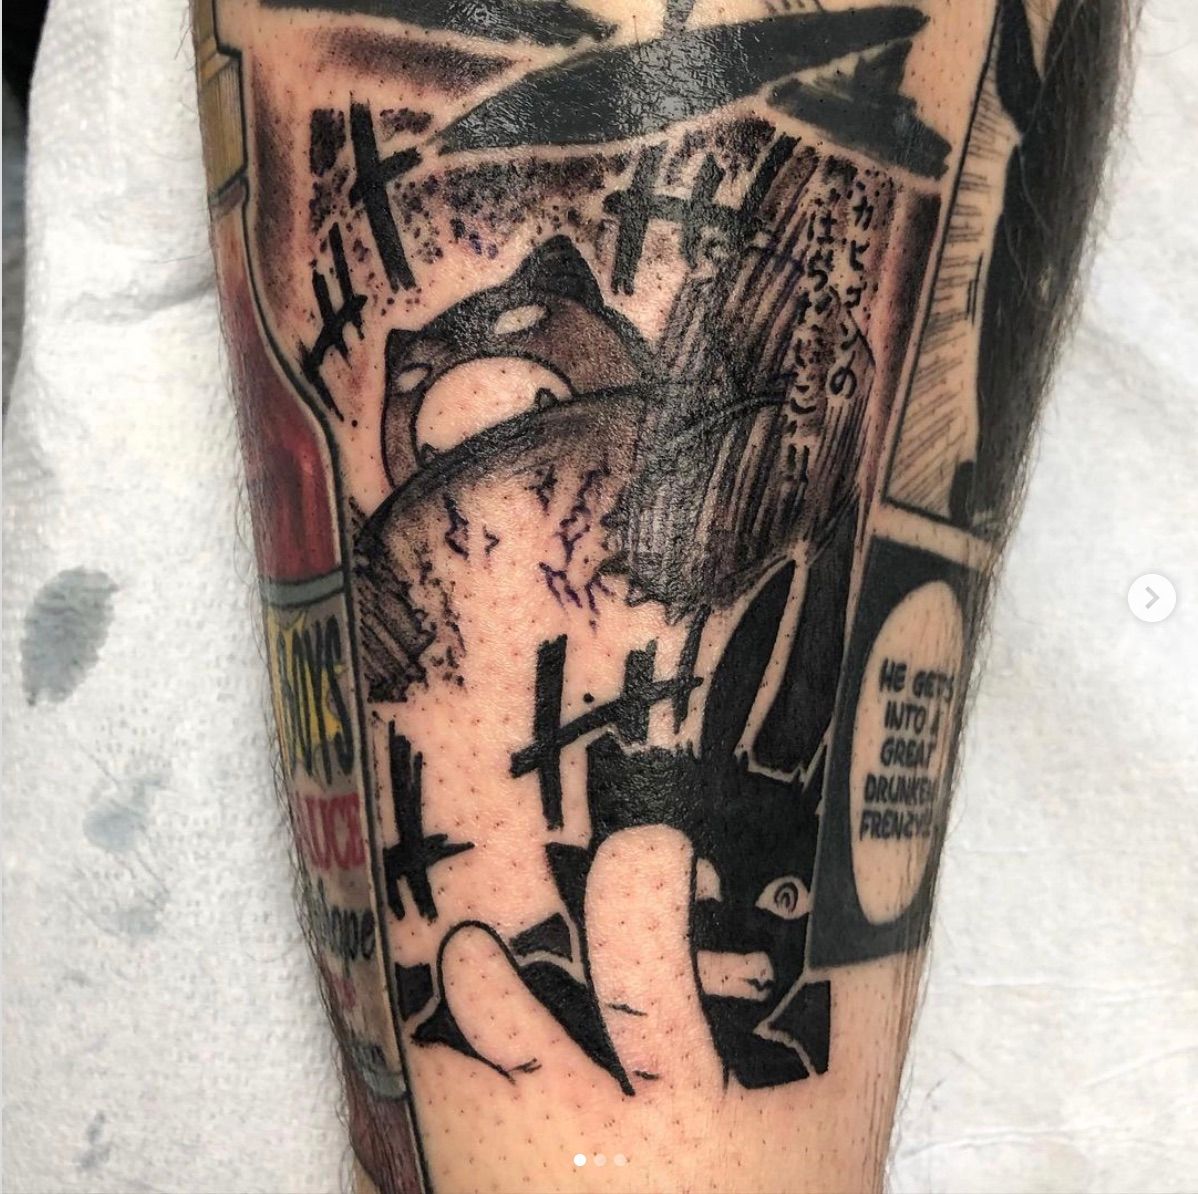 Tattoo of Snorlax terrorizing a town in a manga style